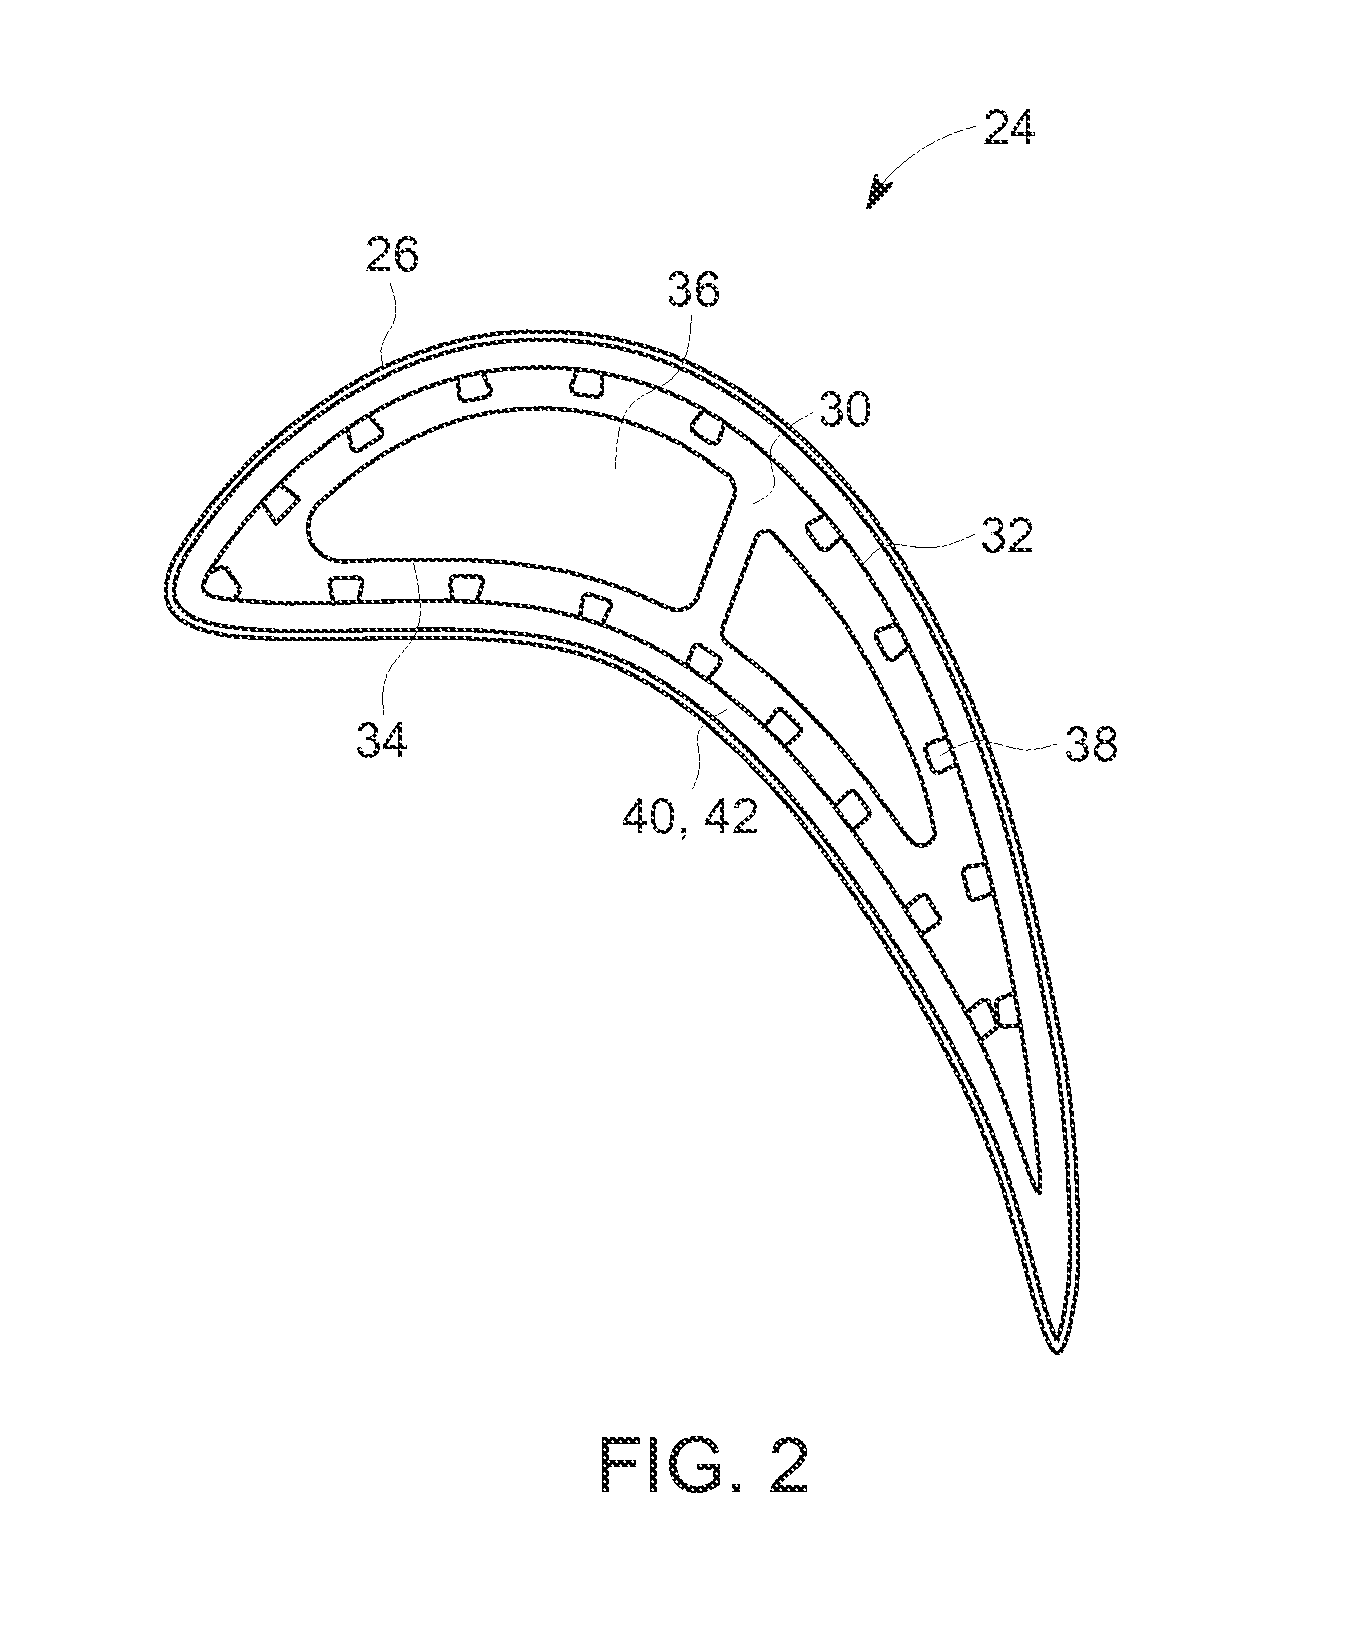 Methods for monitoring strain and temperature in a hot gas path component